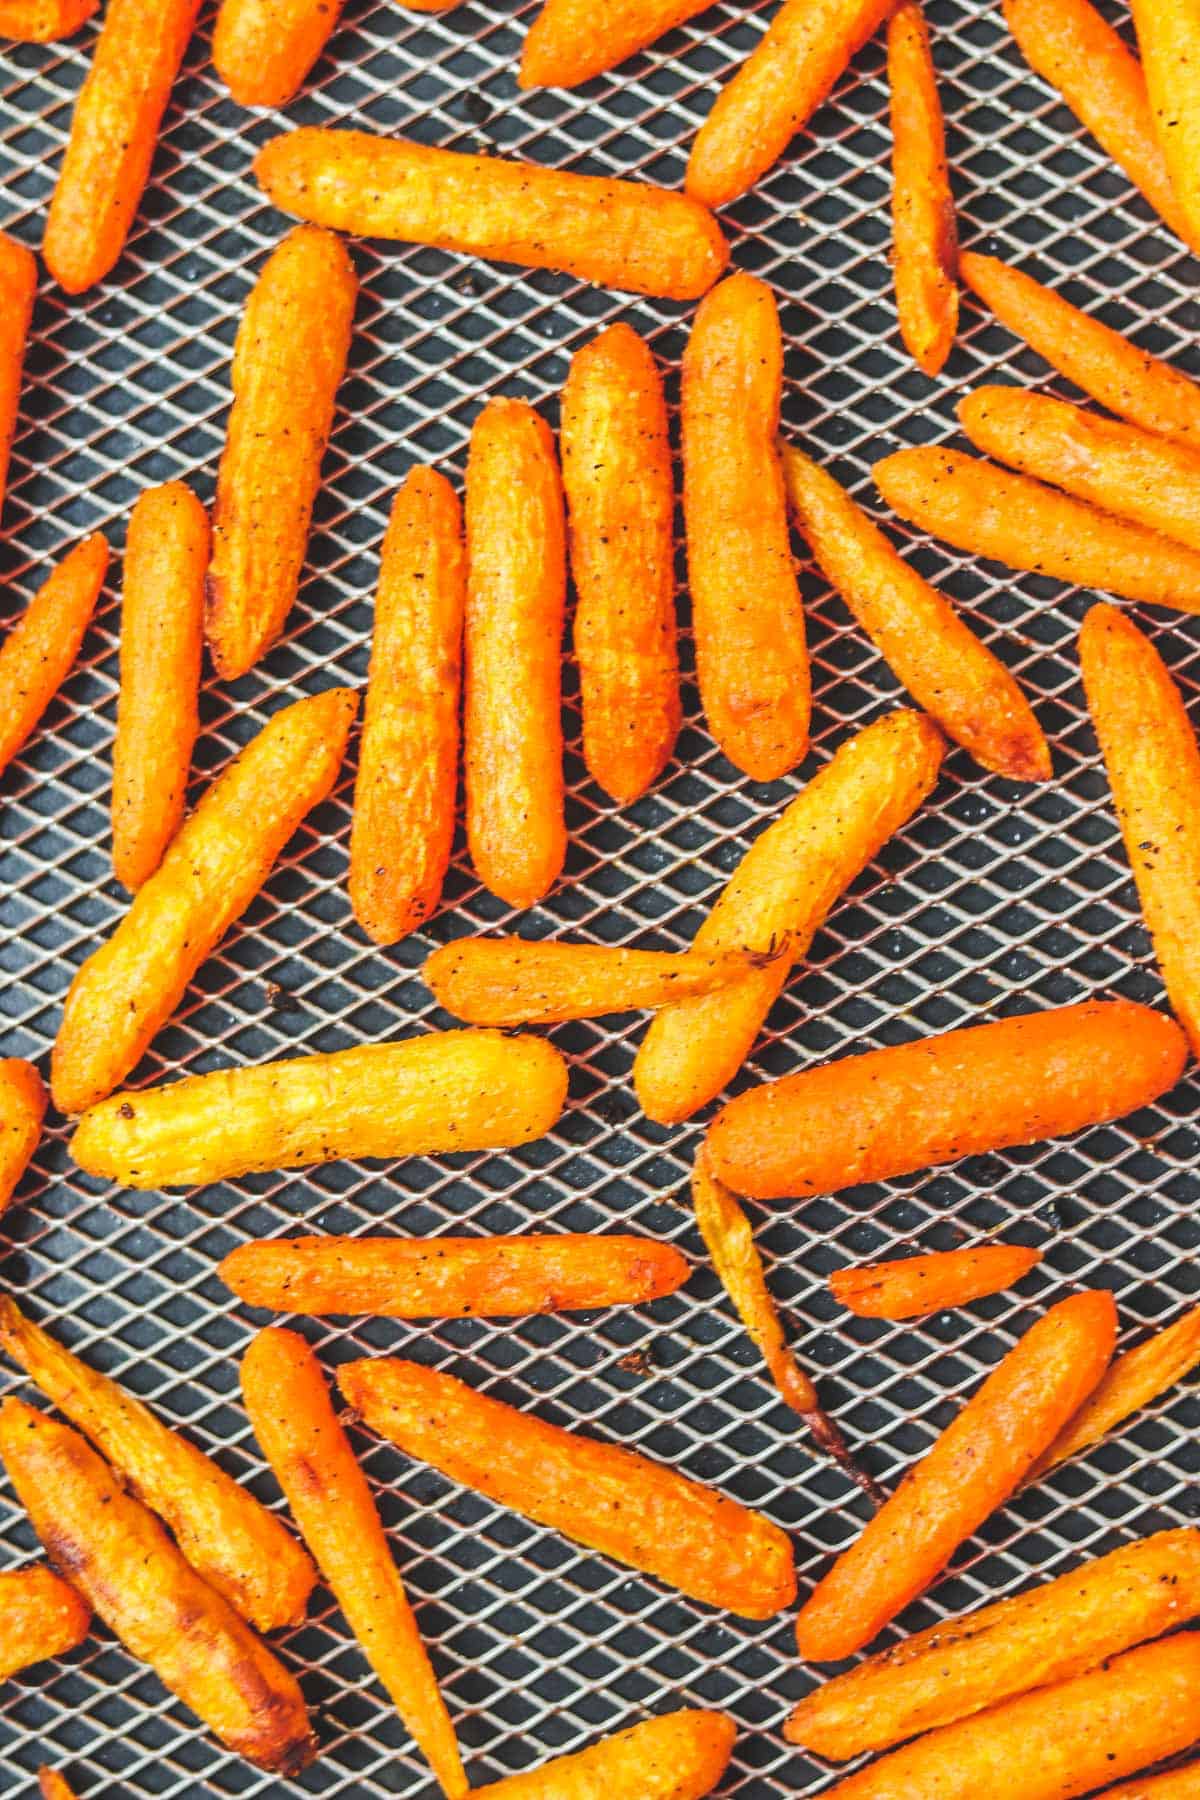 finished roasted carrots in air fryer basket zoom in